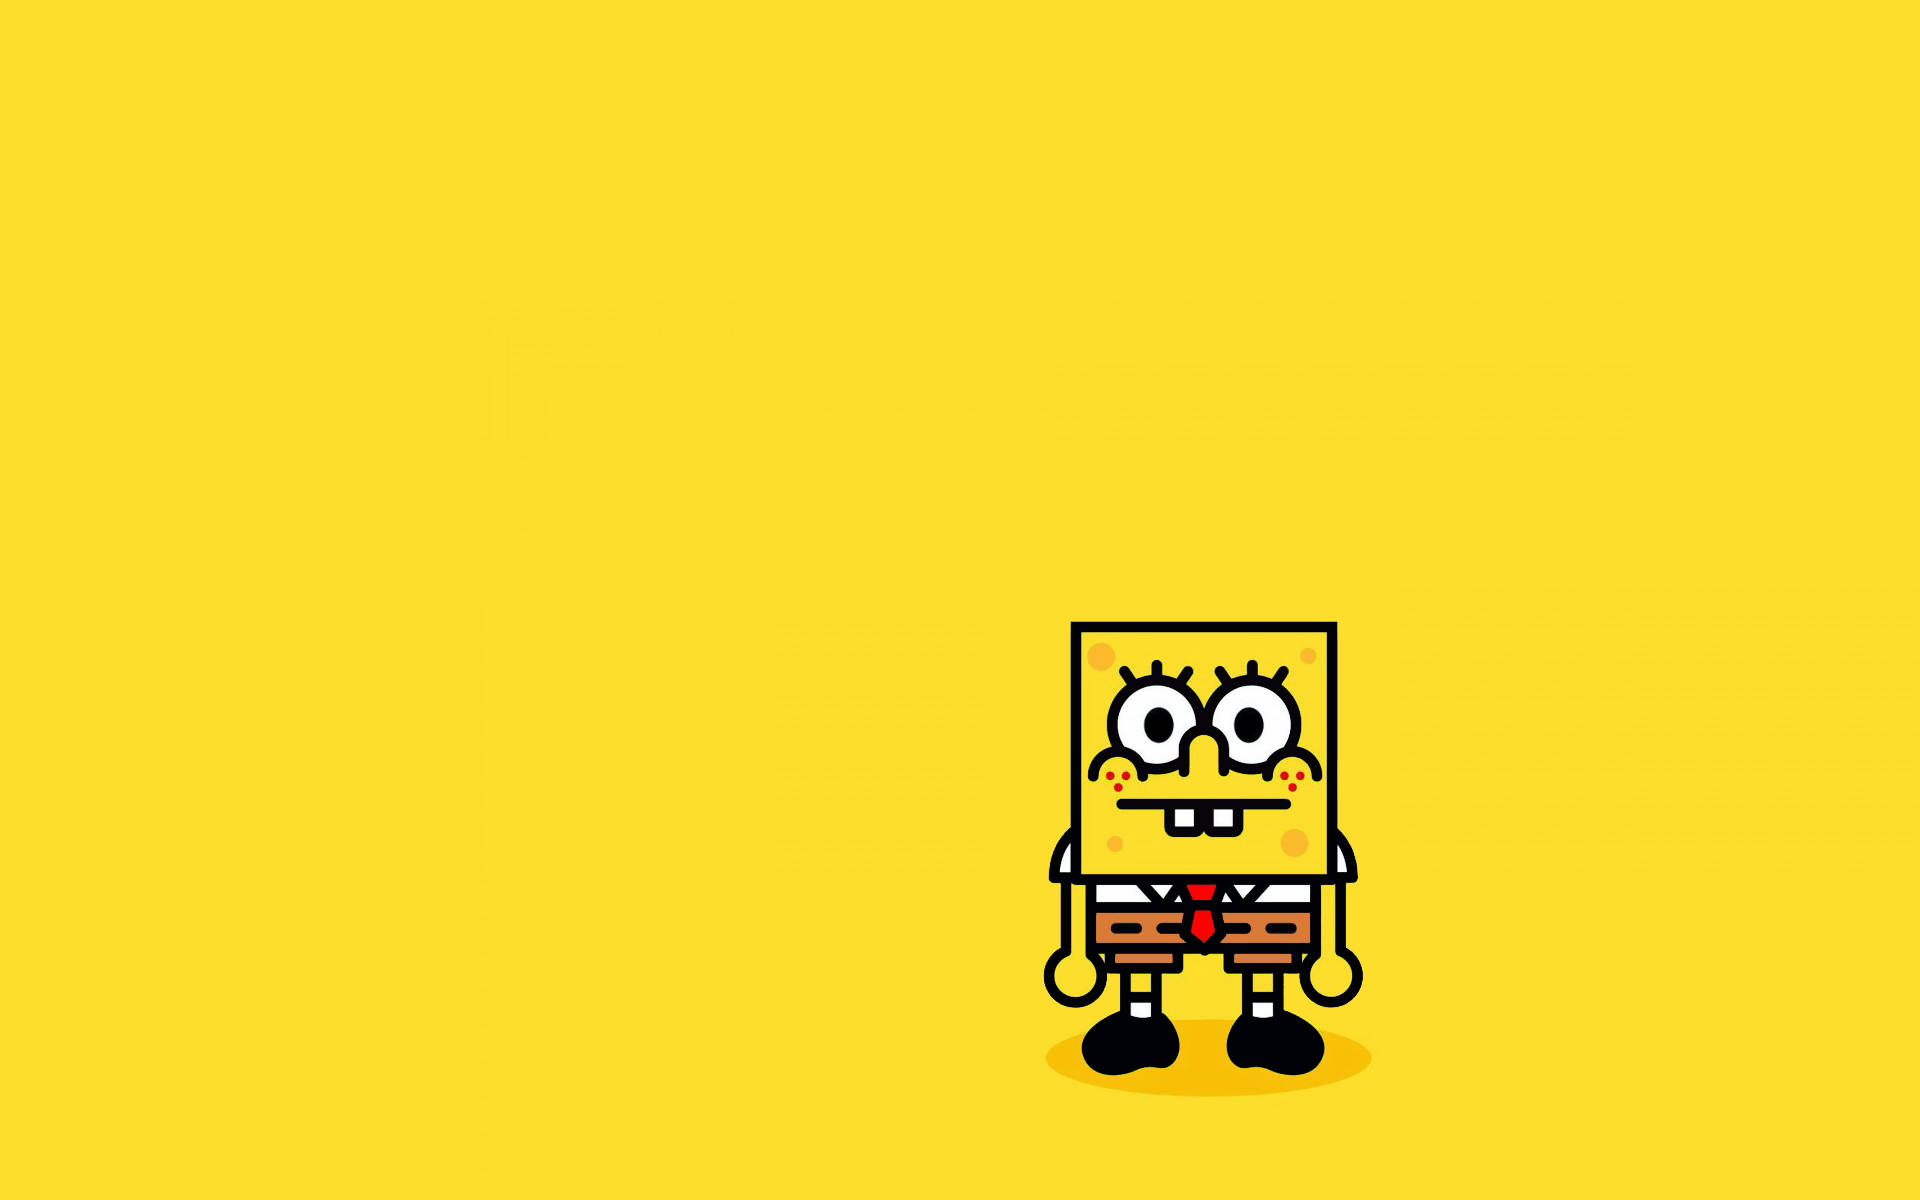 A tribute to the iconic Spongebob Wallpaper